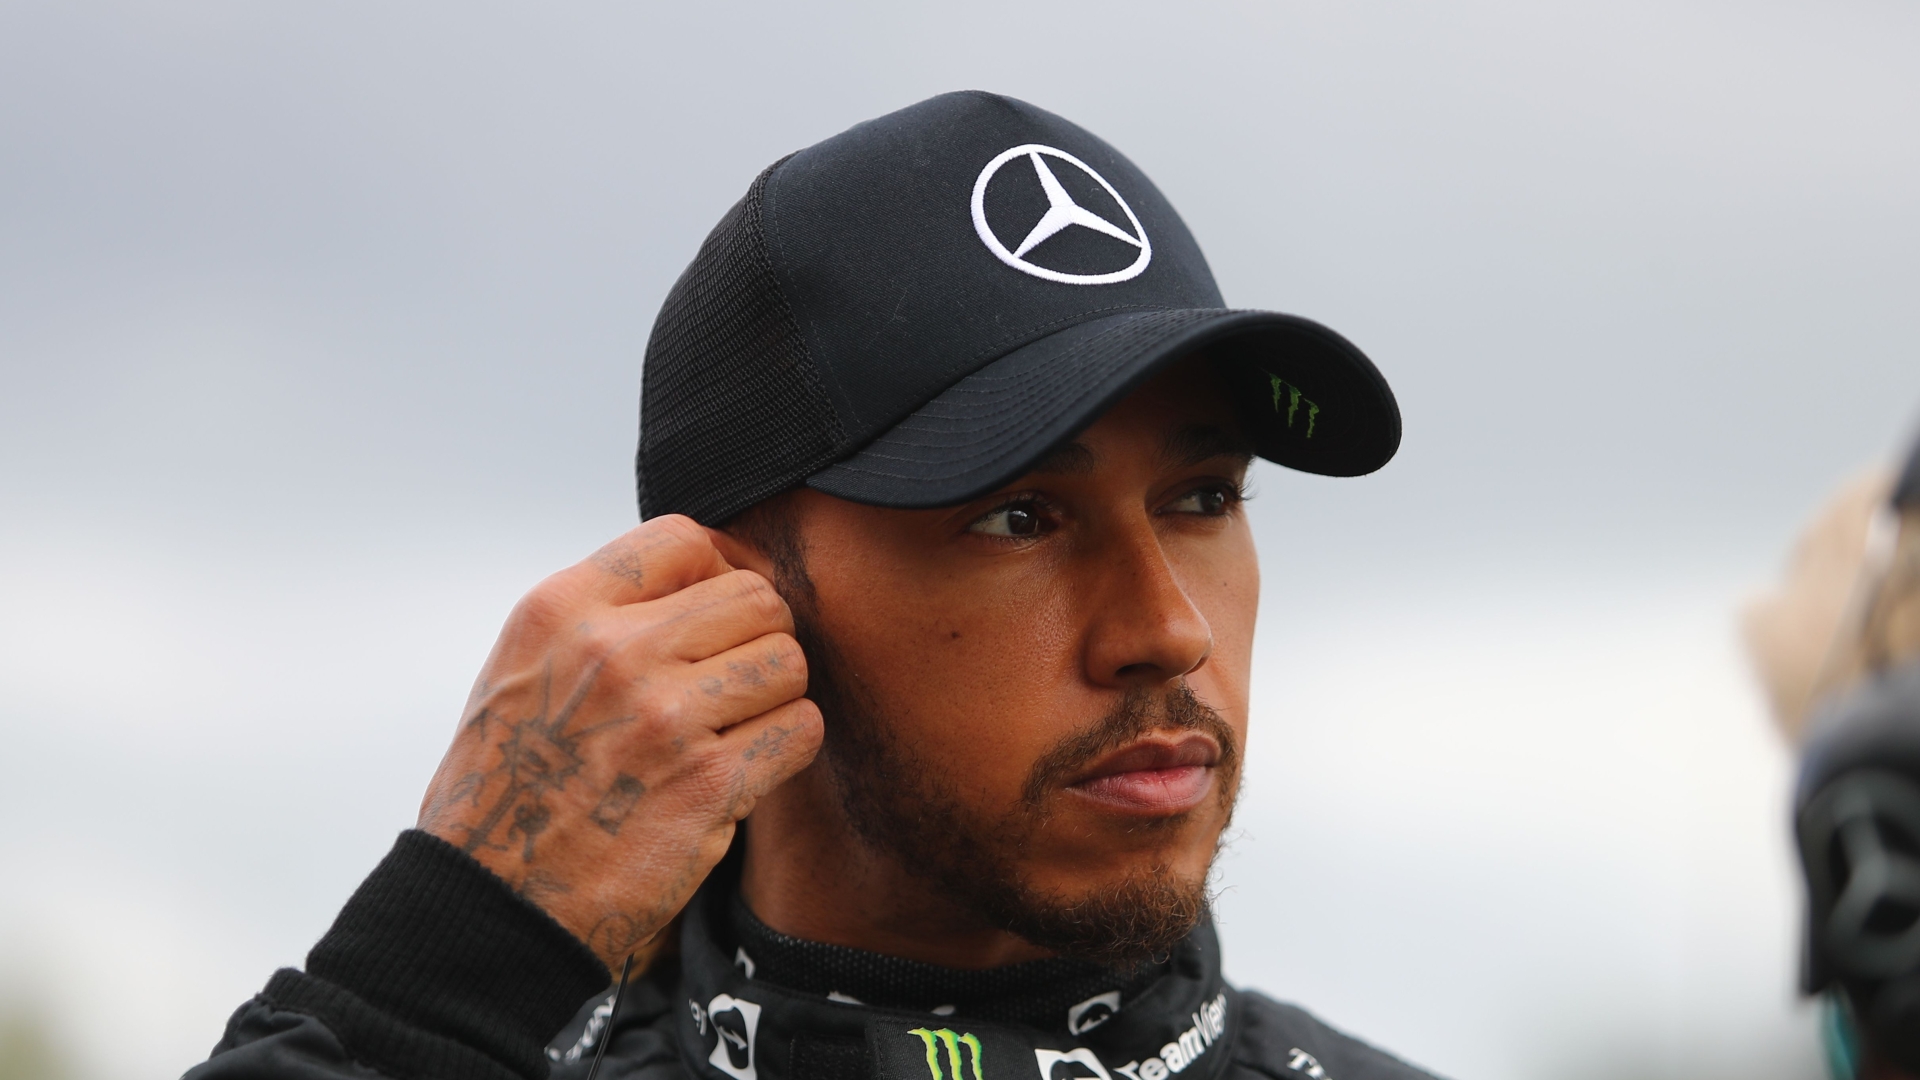 Hamilton may not win a race ALL SEASON for first time in career admits Kravitz